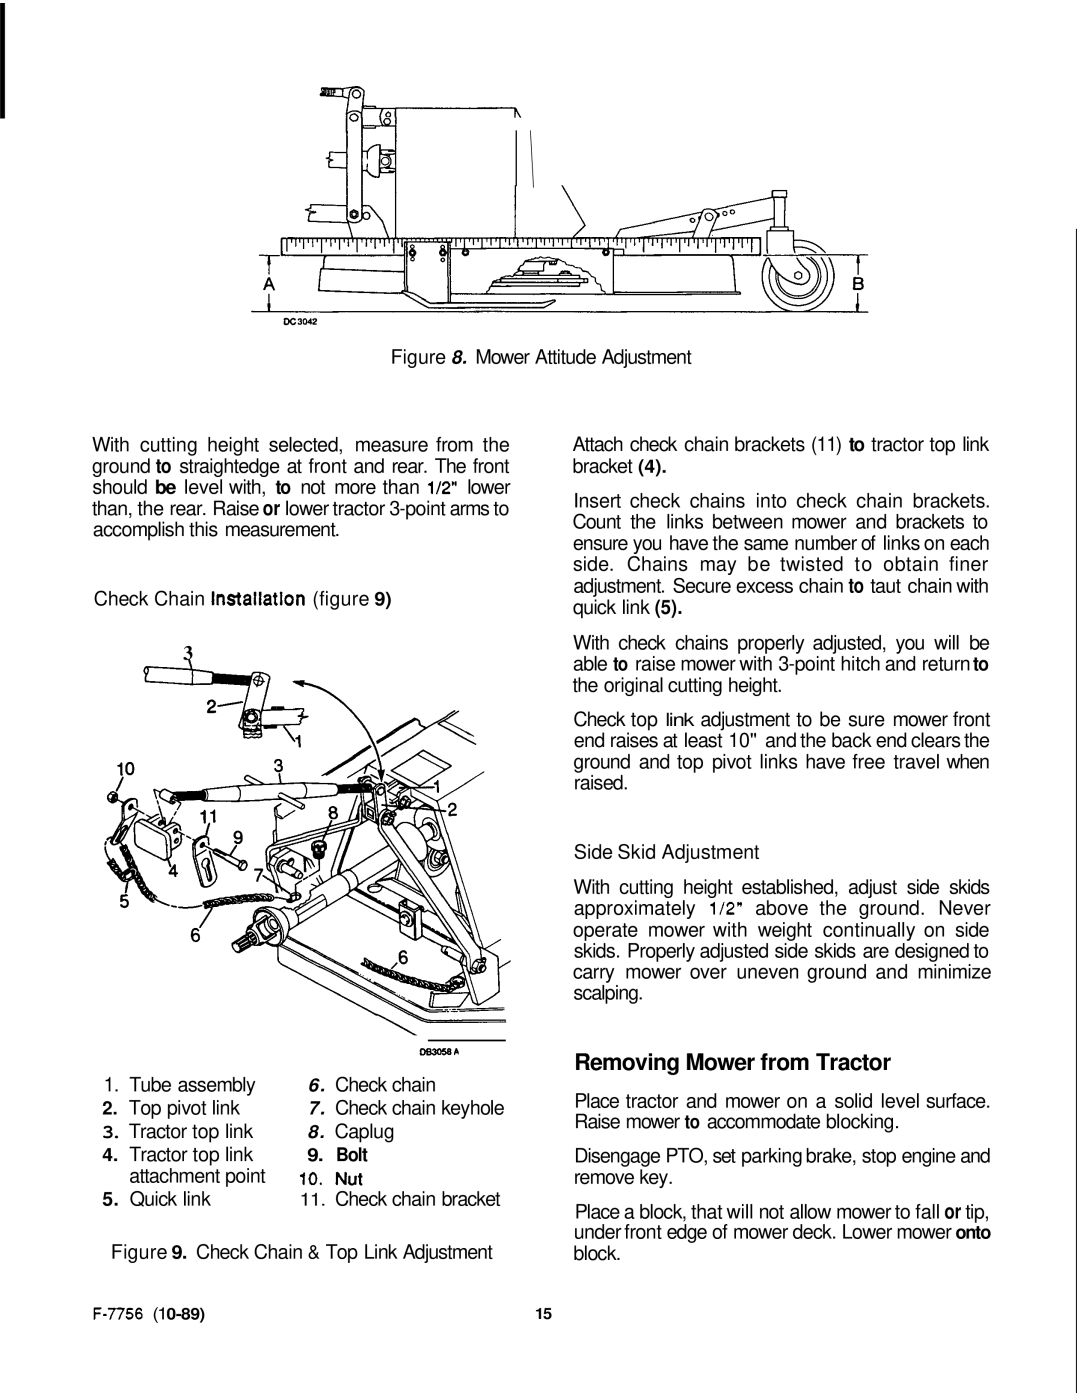 Honda Power Equipment RM752A manual Removing Mower from Tractor, Tube assembly 